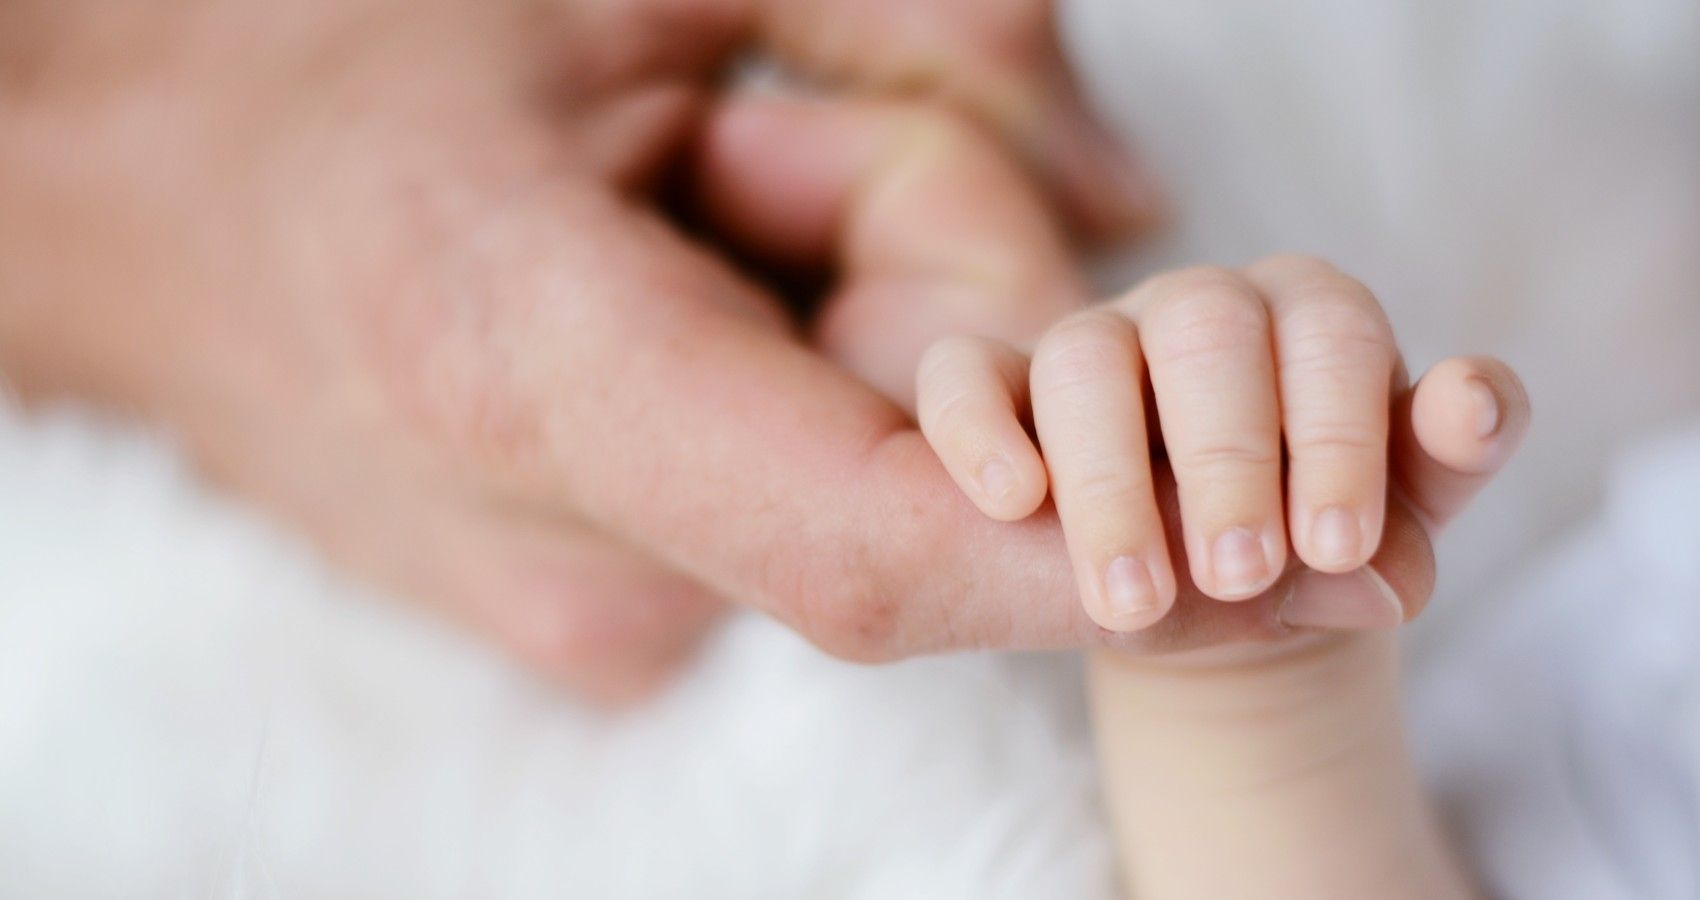 New Study Looks At Why Infants Seem _Protected_ Against COVID-19